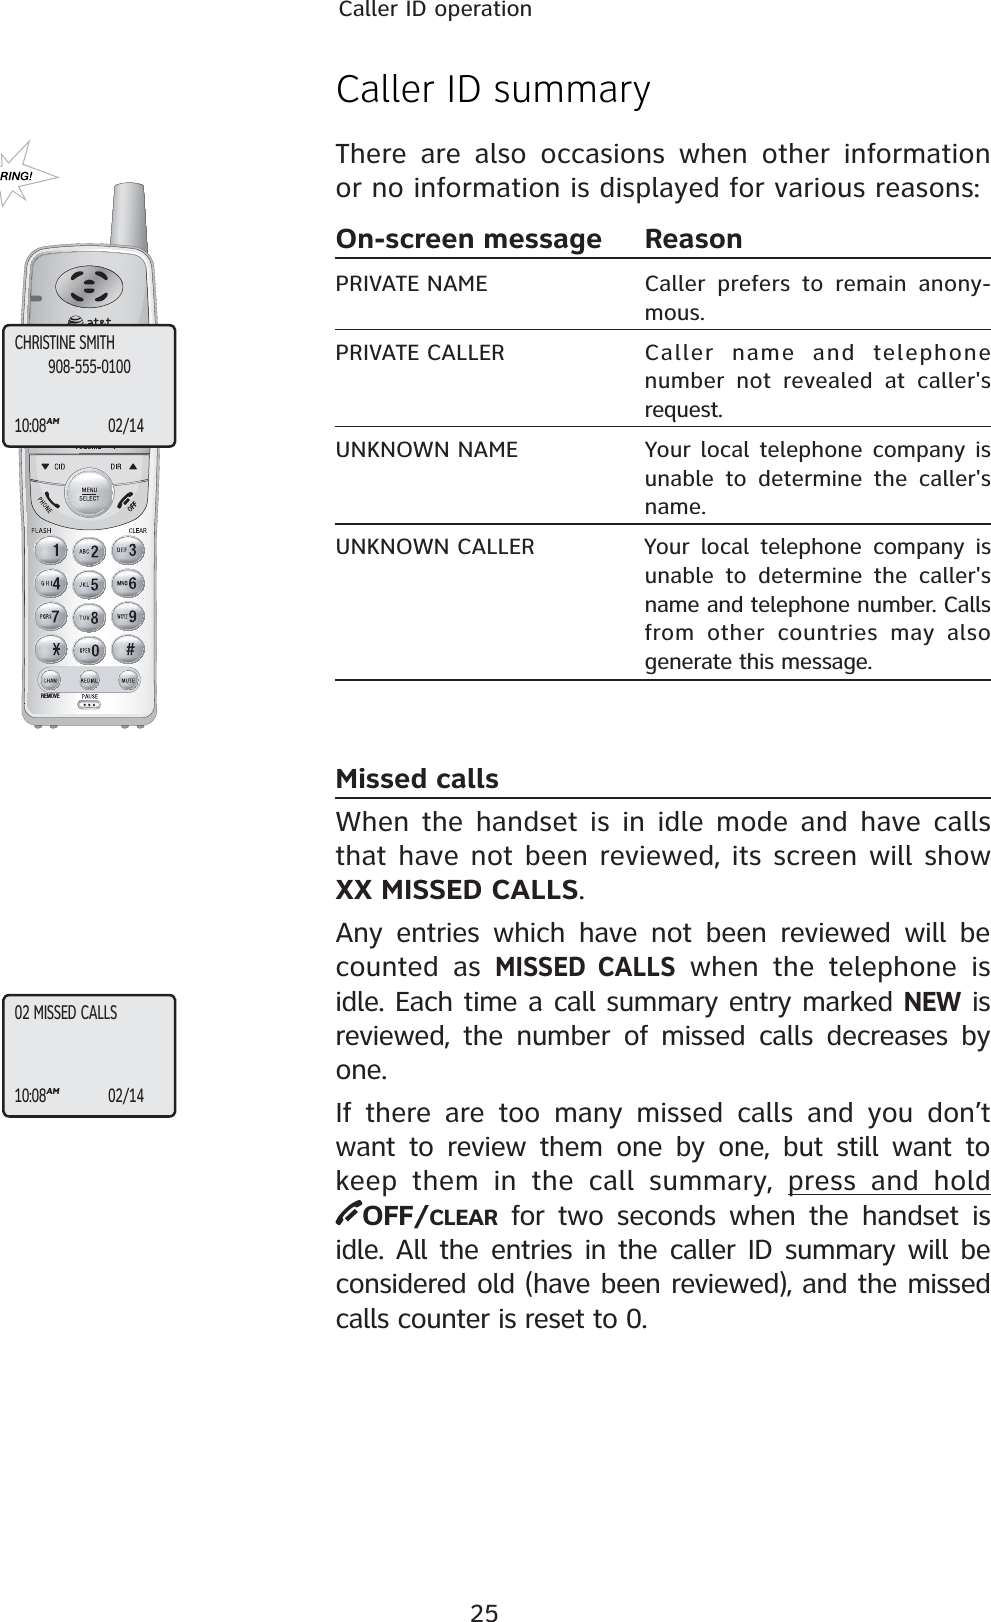 25Caller ID operationREMOVECaller ID summaryThere are also occasions when other information or no information is displayed for various reasons:On-screen message ReasonPRIVATE NAME Caller prefers to remain anony-mous.PRIVATE CALLER Caller name and telephone number not revealed at caller&apos;s request.UNKNOWN NAME Your local telephone company is unable to determine the caller&apos;s name.UNKNOWN CALLER Your local telephone company is unable to determine the caller&apos;s name and telephone number. Calls from other countries may also generate this message.Missed callsWhen the handset is in idle mode and have calls that have not been reviewed, its screen will show XX MISSED CALLS.Any entries which have not been reviewed will be counted as MISSED CALLS when the telephone is idle. Each time a call summary entry marked NEW is reviewed, the number of missed calls decreases by one. If there are too many missed calls and you don’t want to review them one by one, but still want to keep them in the call summary, press and holdOFF/CLEAR for two seconds when the handset is idle. All the entries in the caller ID summary will be considered old (have been reviewed), and the missed calls counter is reset to 0.CHRISTINE SMITH10:08AM02/14908-555-010002 MISSED CALLS10:08AM02/14